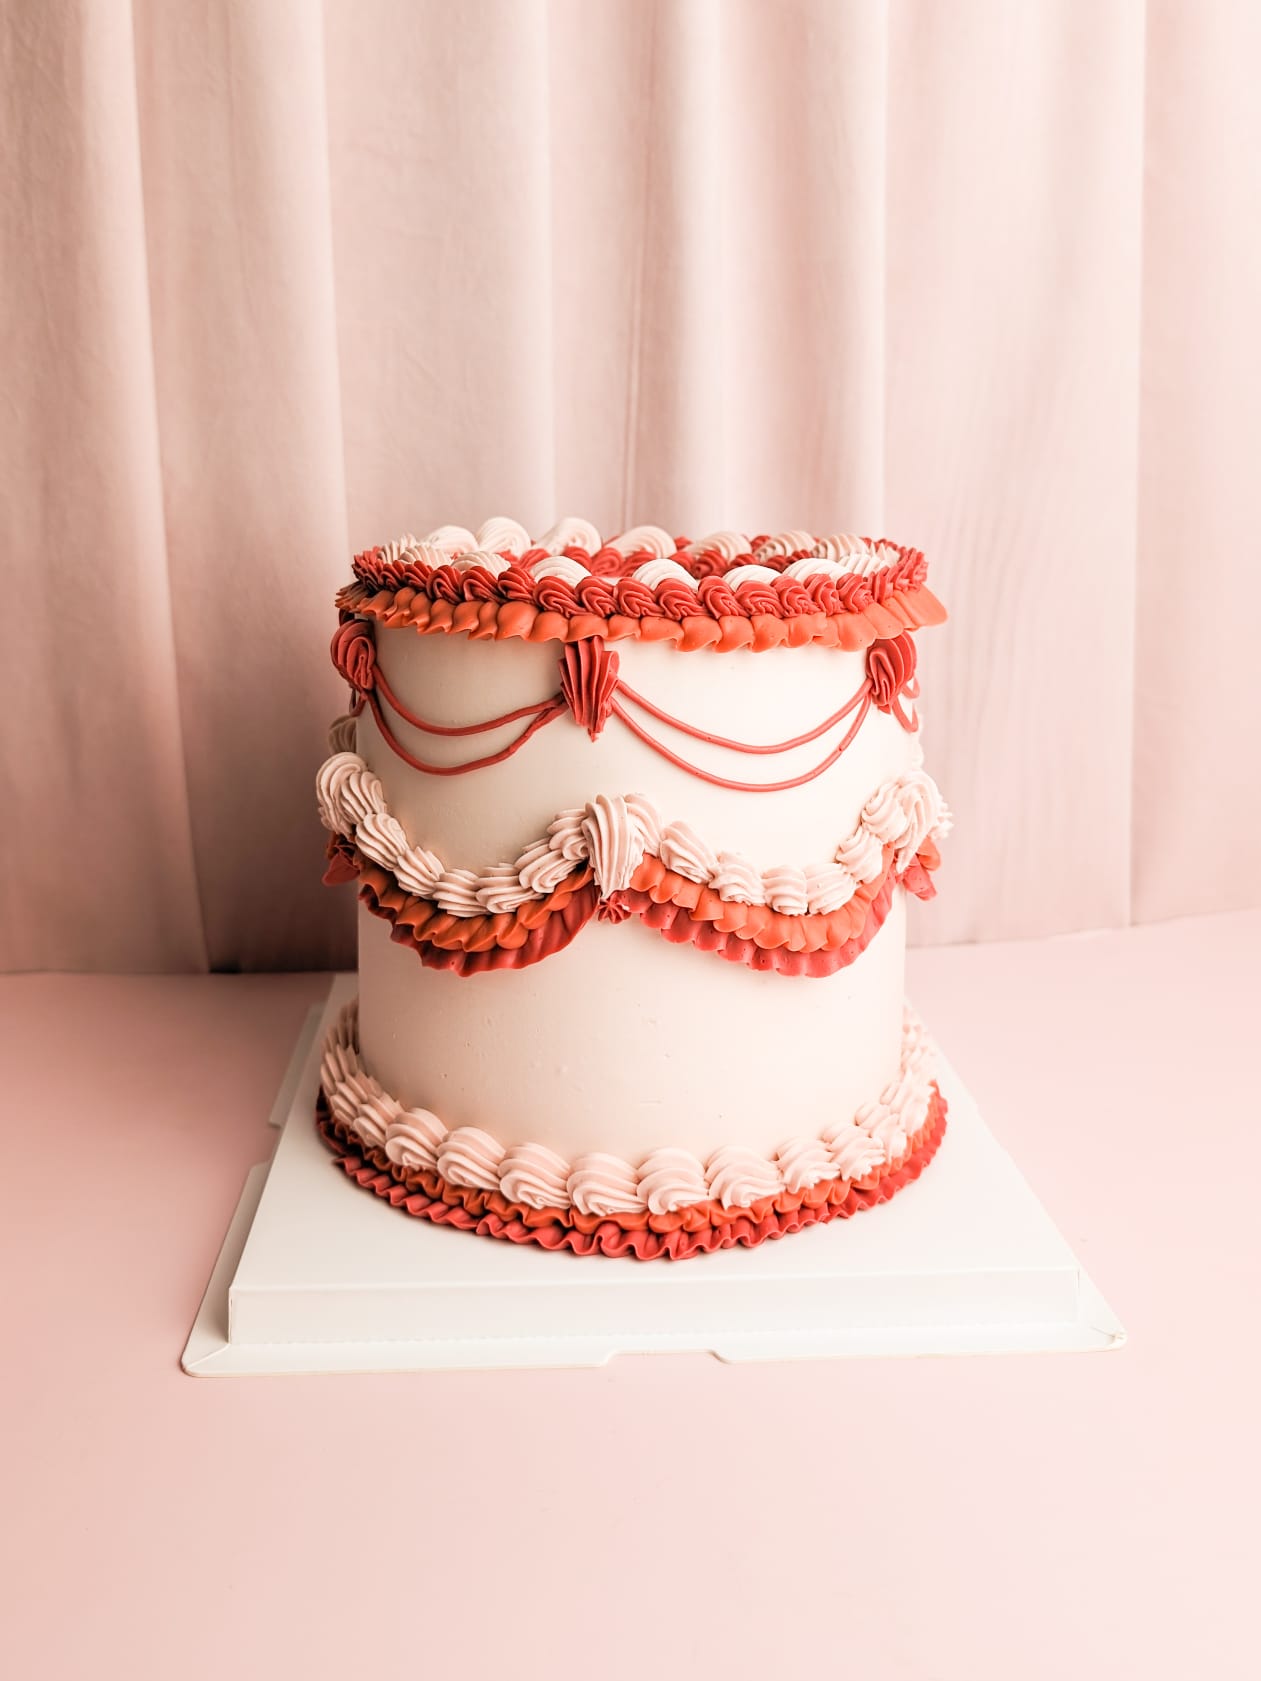 Peachy Red Lambeth Cake with red and pink cream ruffles on top, middle, and bottom of the cake.